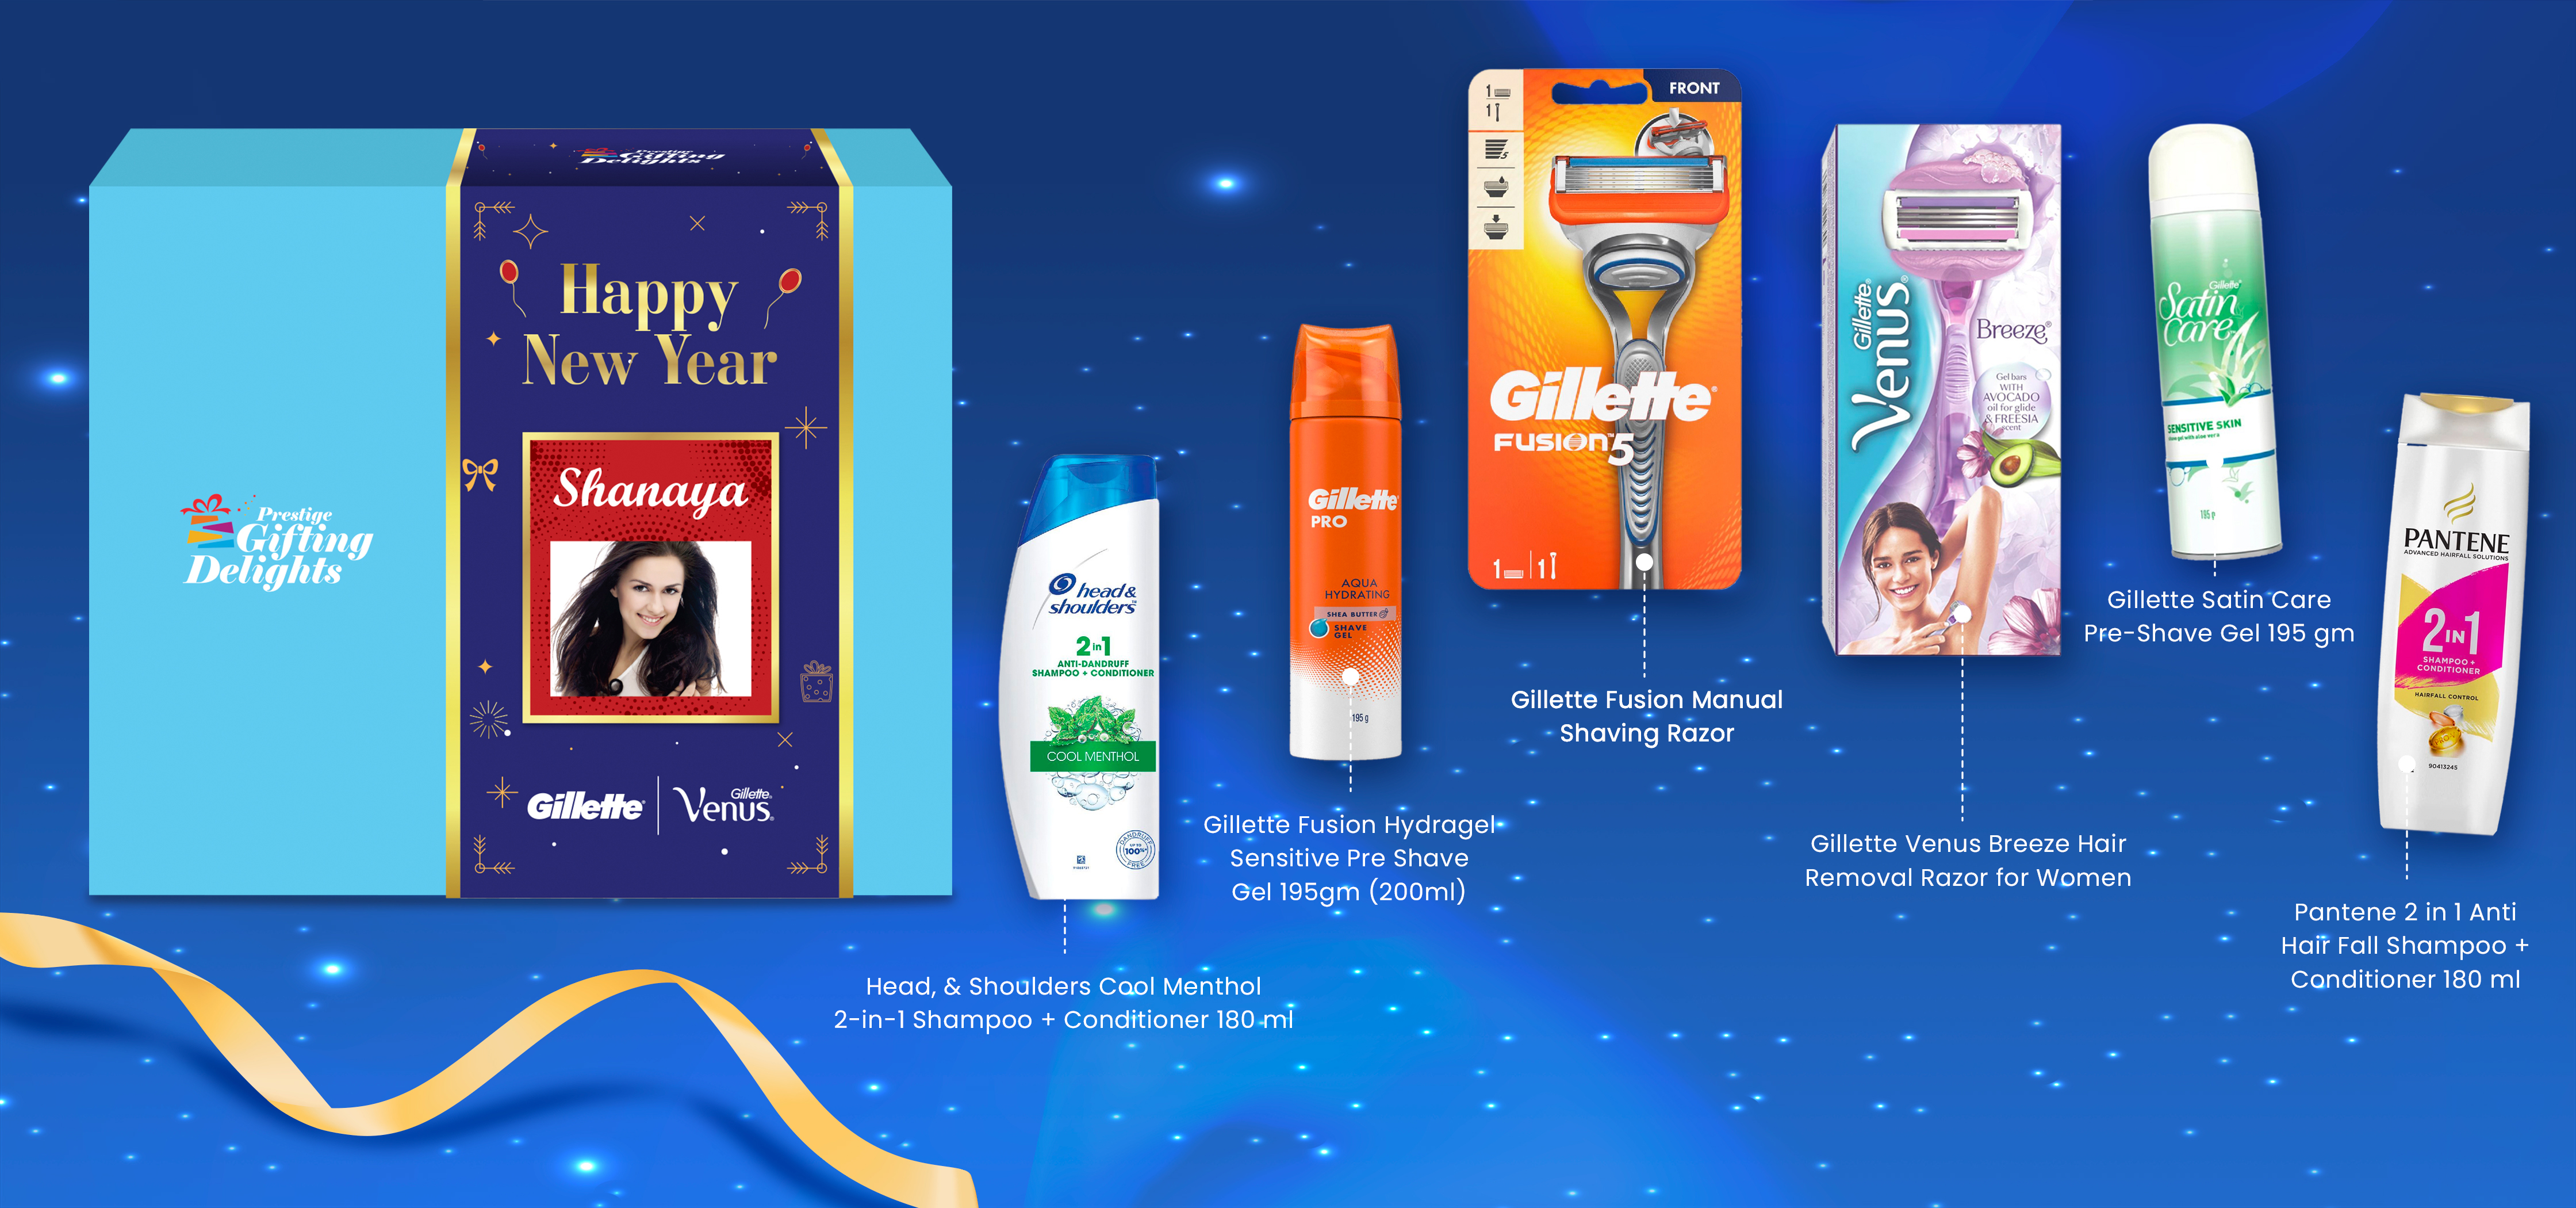 Gillette Venus + Fusion Manual Shaving & Haircare New Year Kit For Him And Her